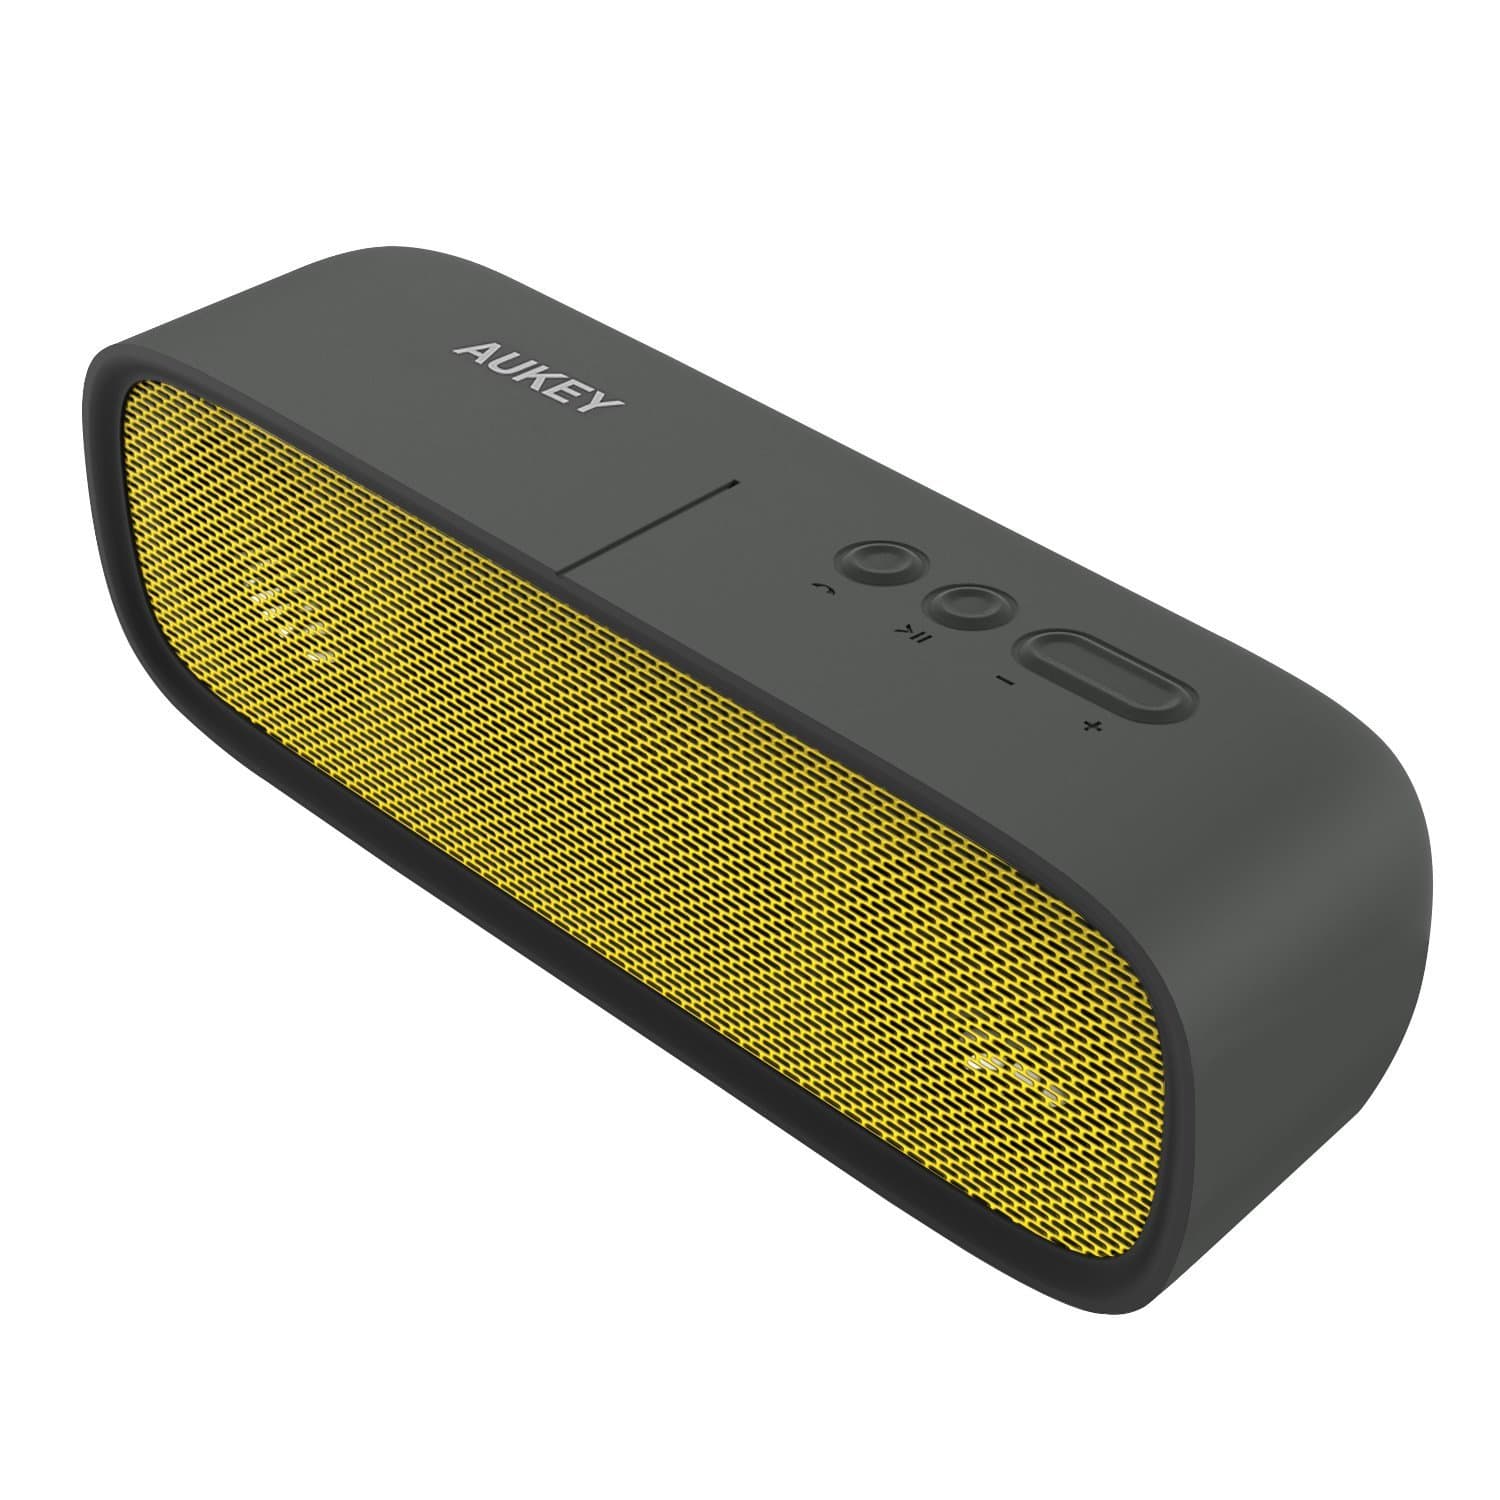 AUKEY SK-M7 Wireless Portable Bluetooth 4.1 outdoor Stereo Speaker - Aukey Malaysia Official Store